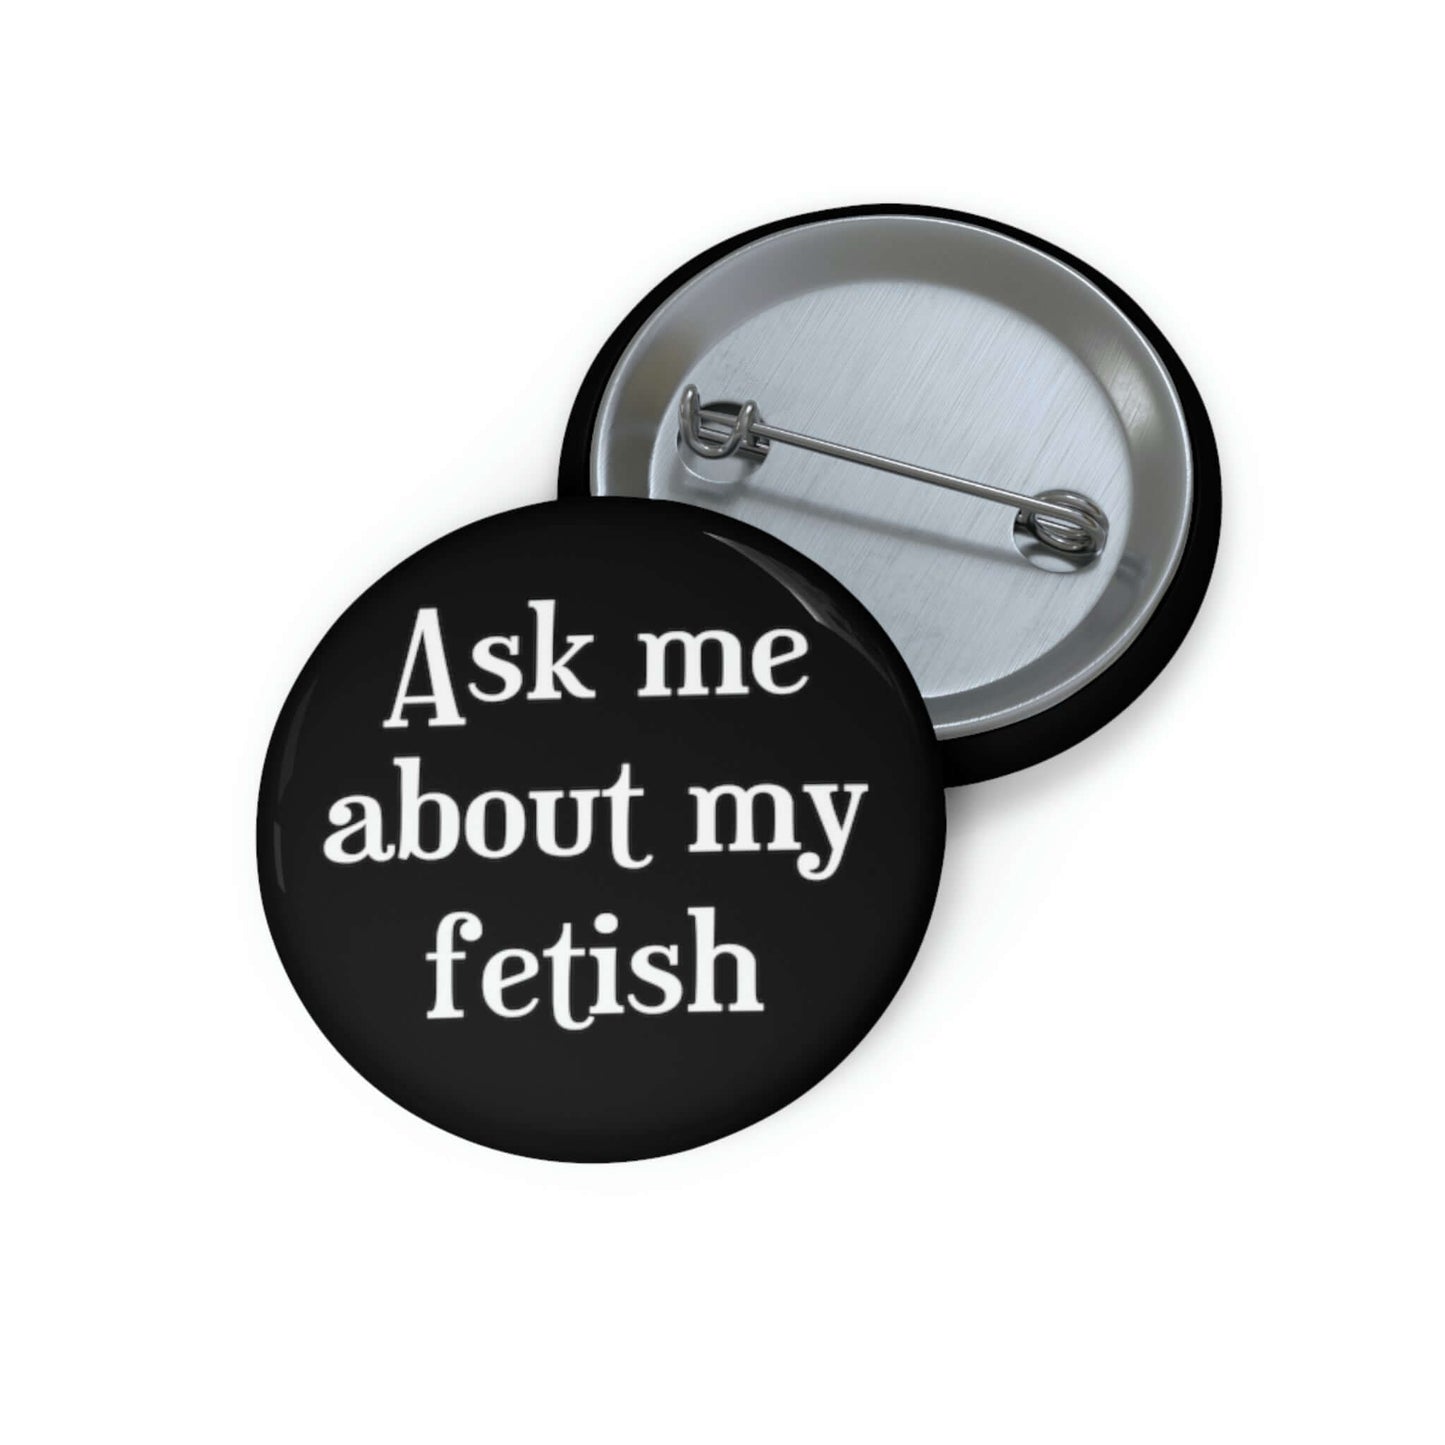 Ask me about my fetish pinback button